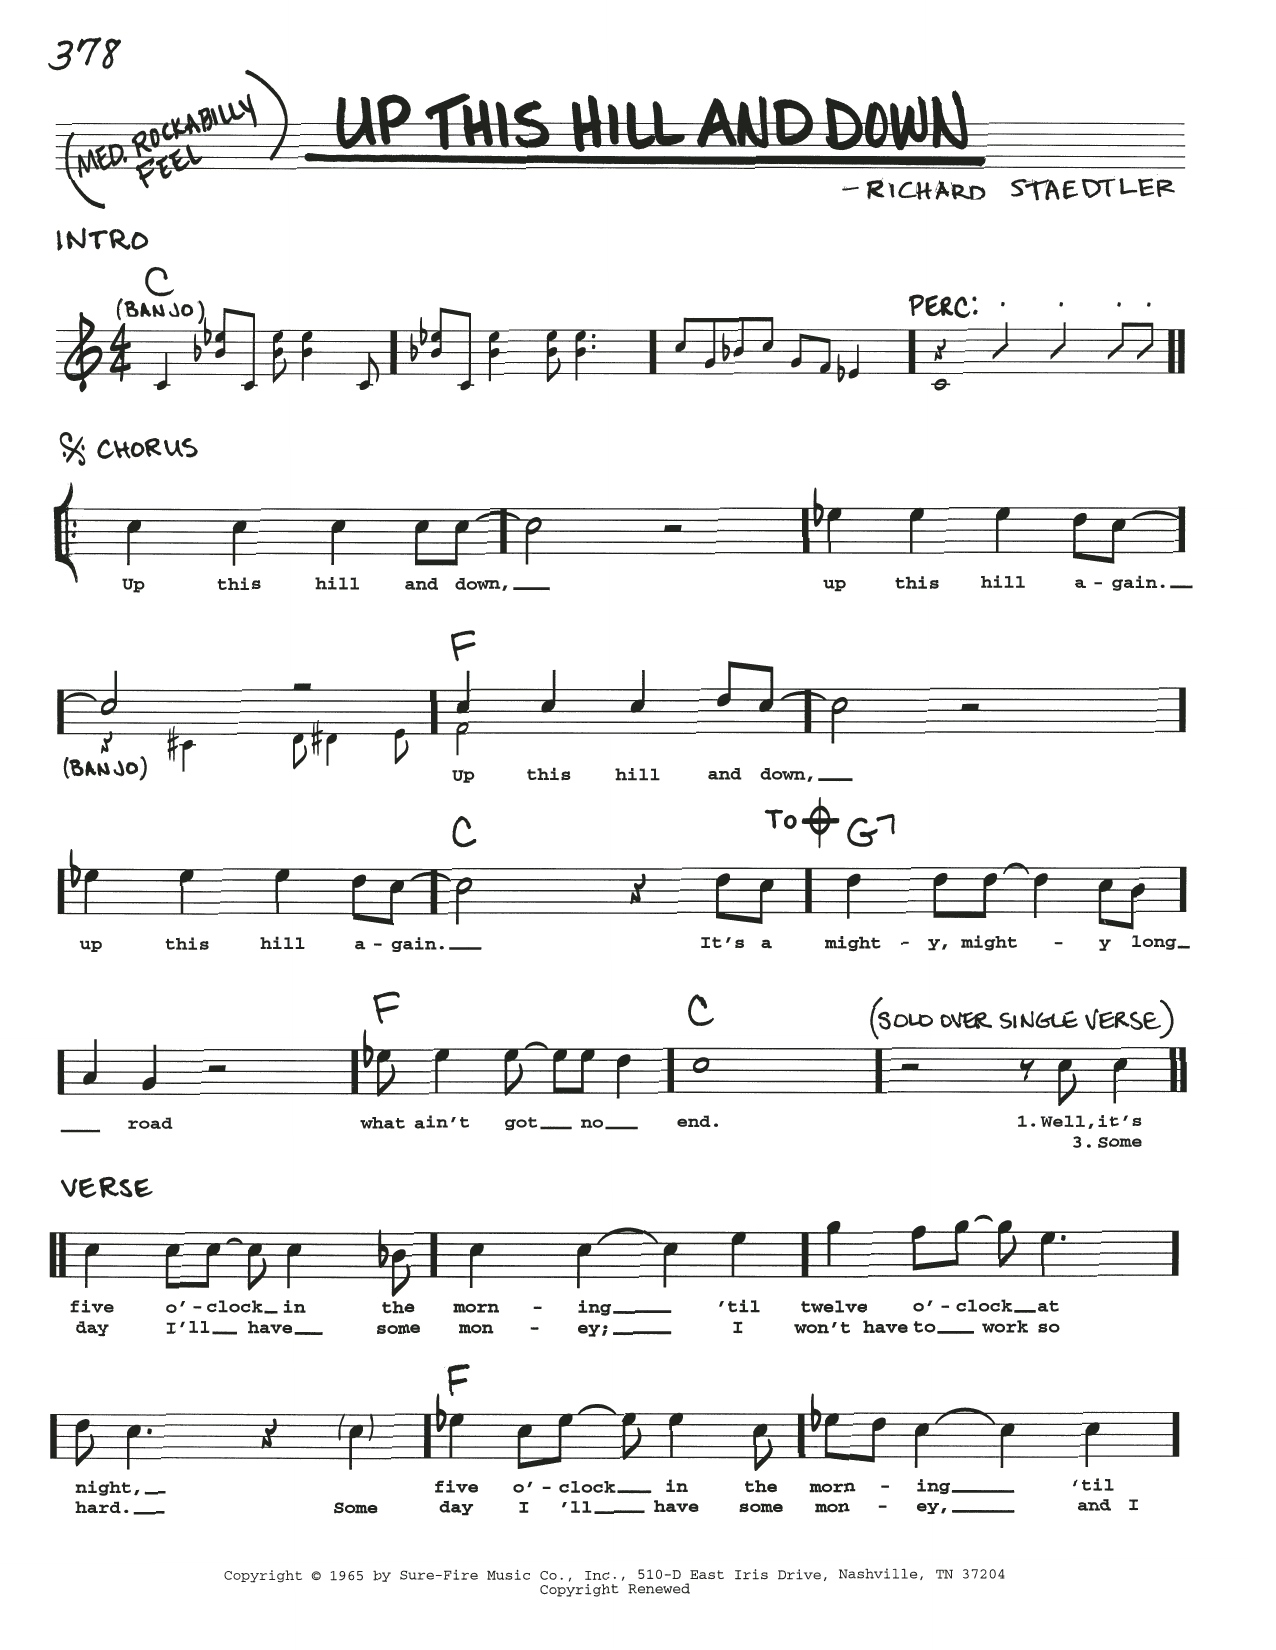 Download Richard Staedtler Up This Hill And Down Sheet Music